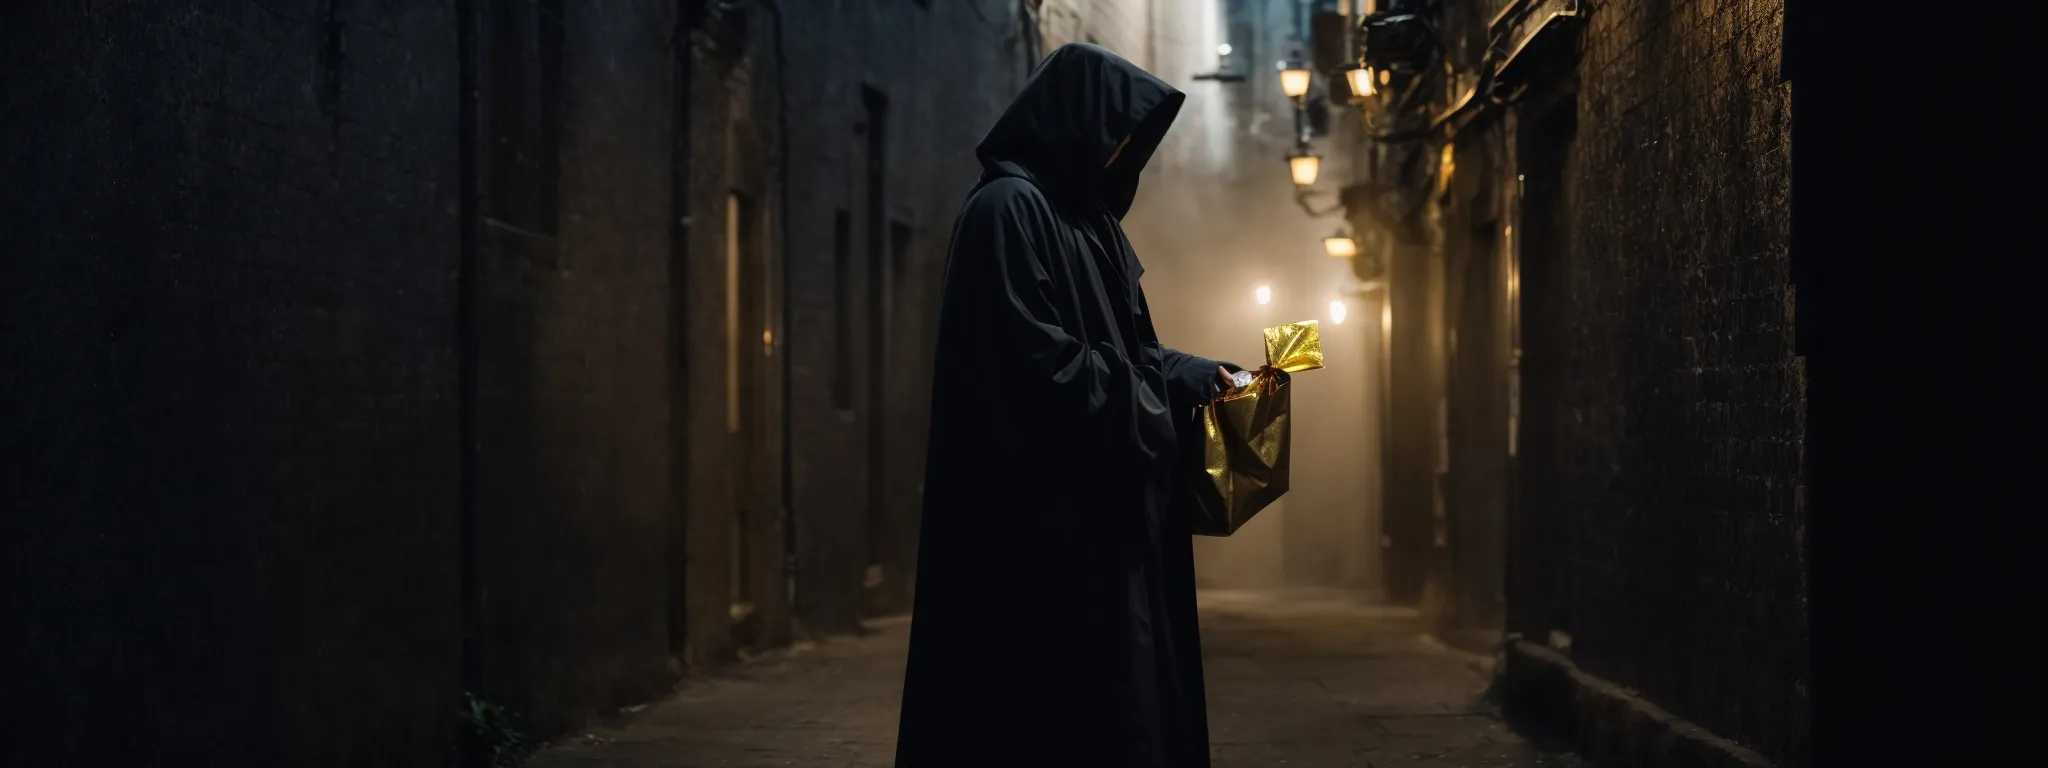 a cloaked figure subtly exchanging a bag of gold in a dark alley, symbolizing the secretive transaction of paid linking schemes.